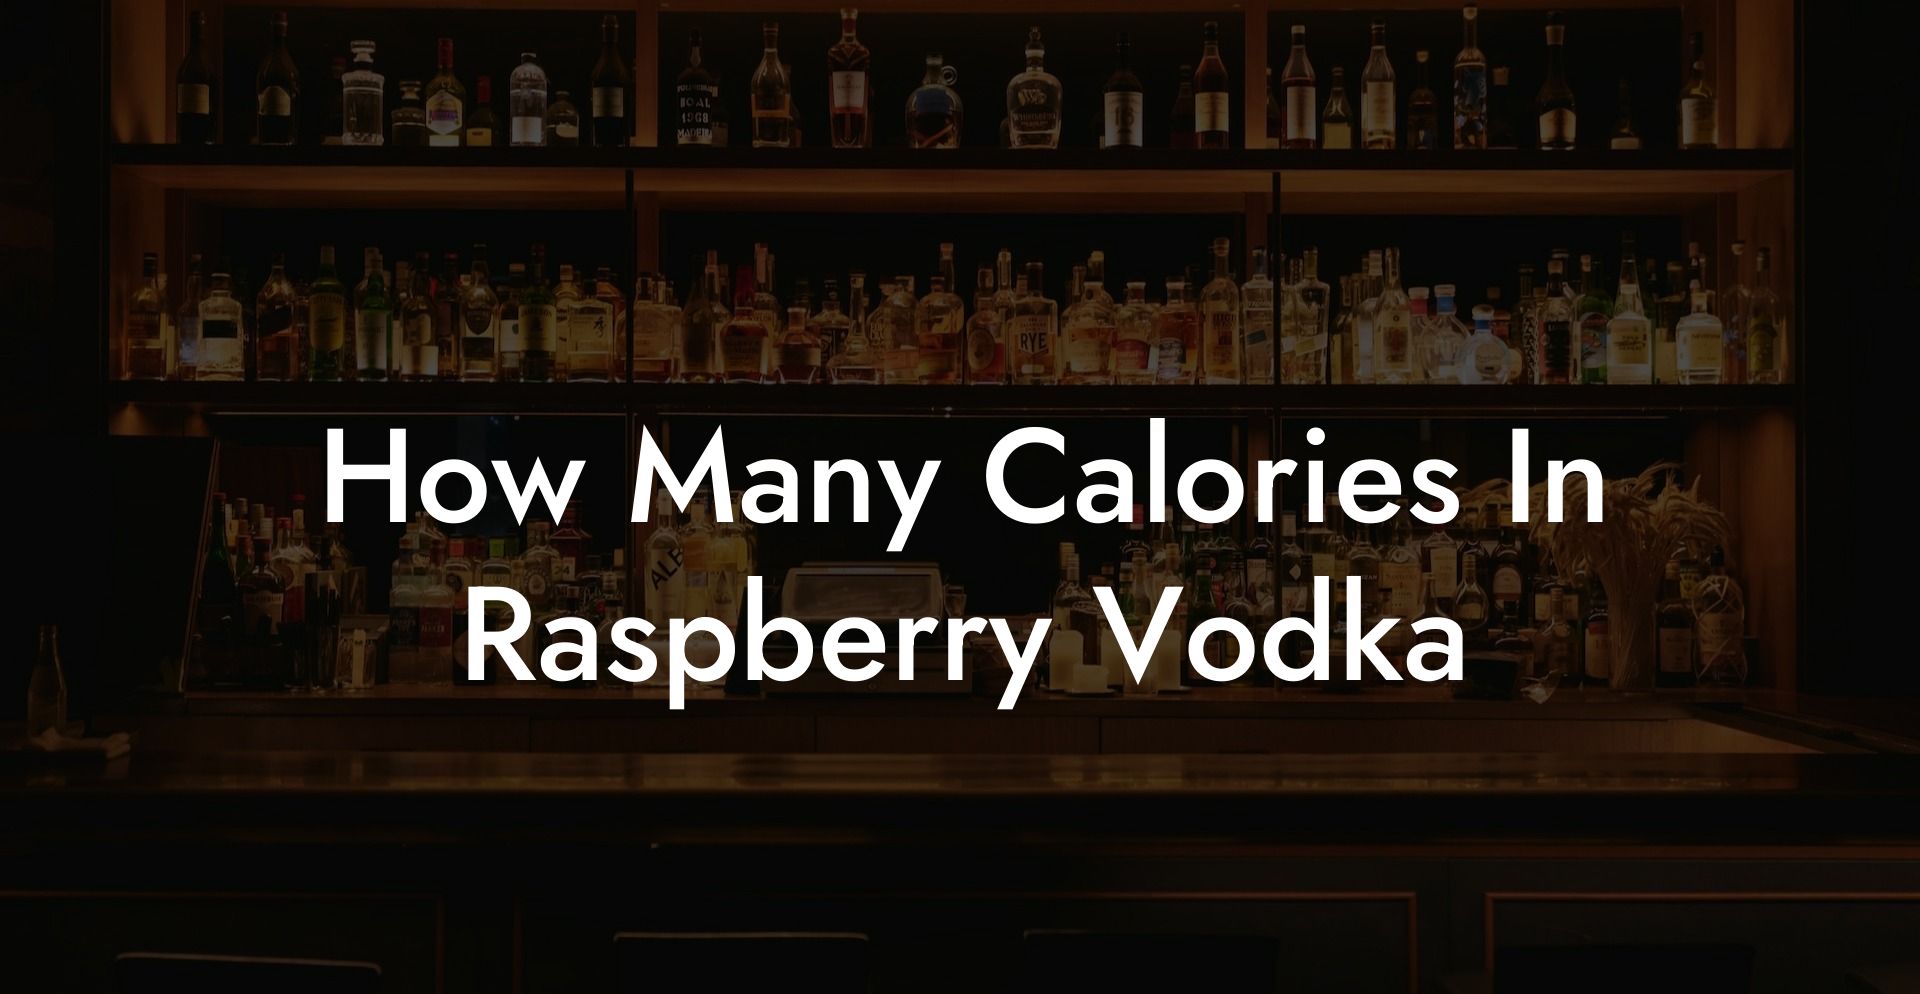 How Many Calories In Raspberry Vodka